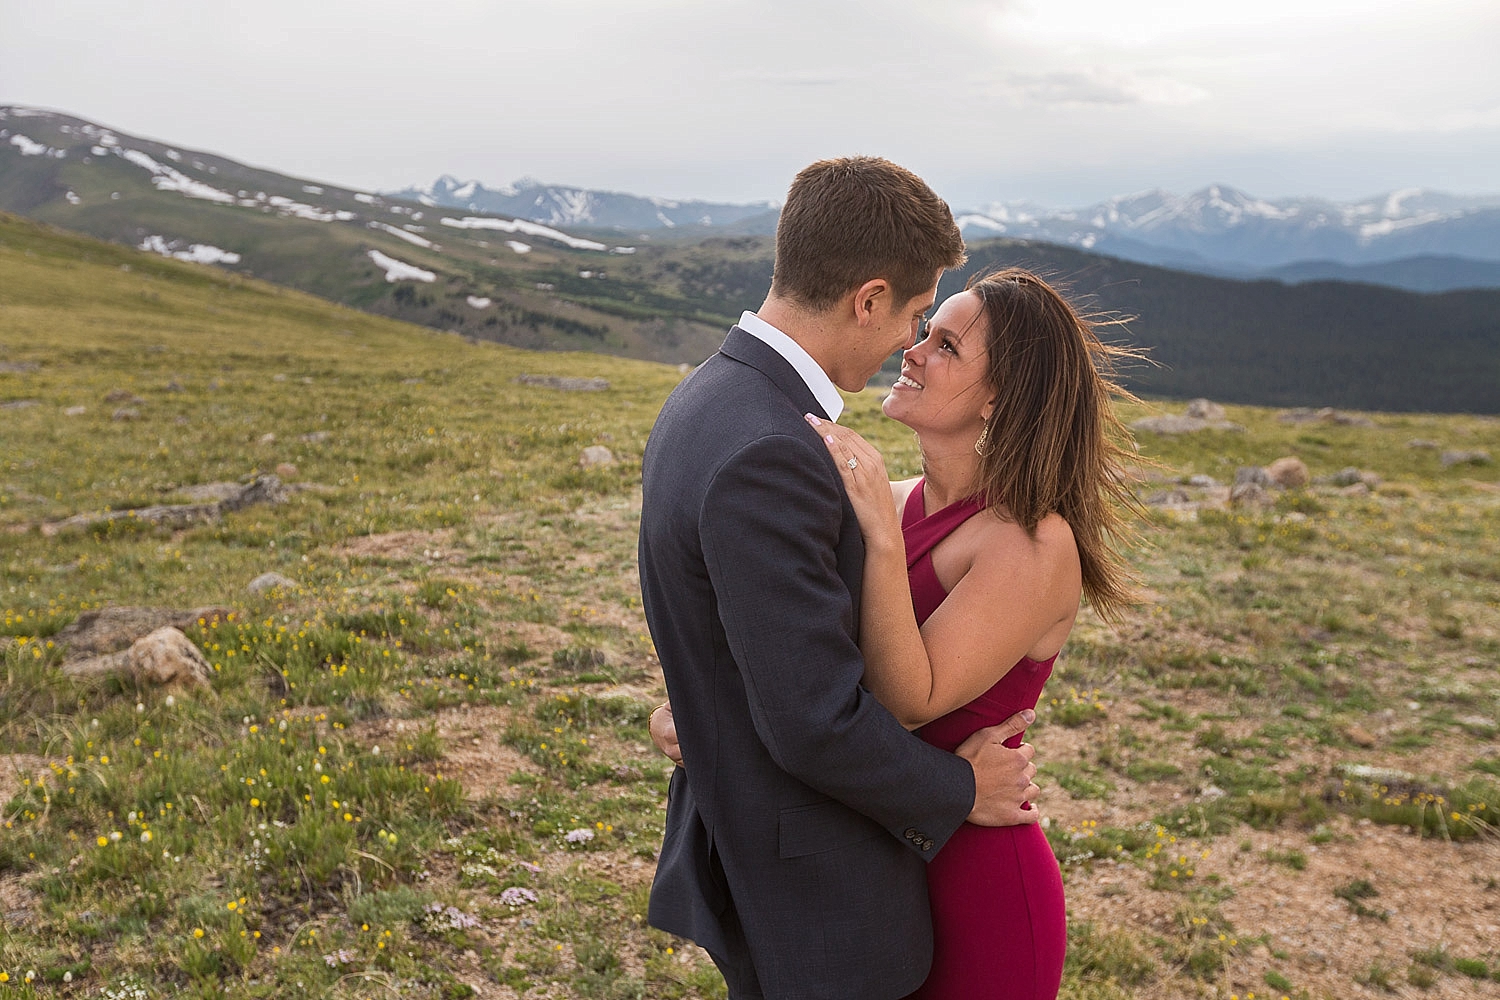 Mt Evans Engagement Shoot with Mountain Views